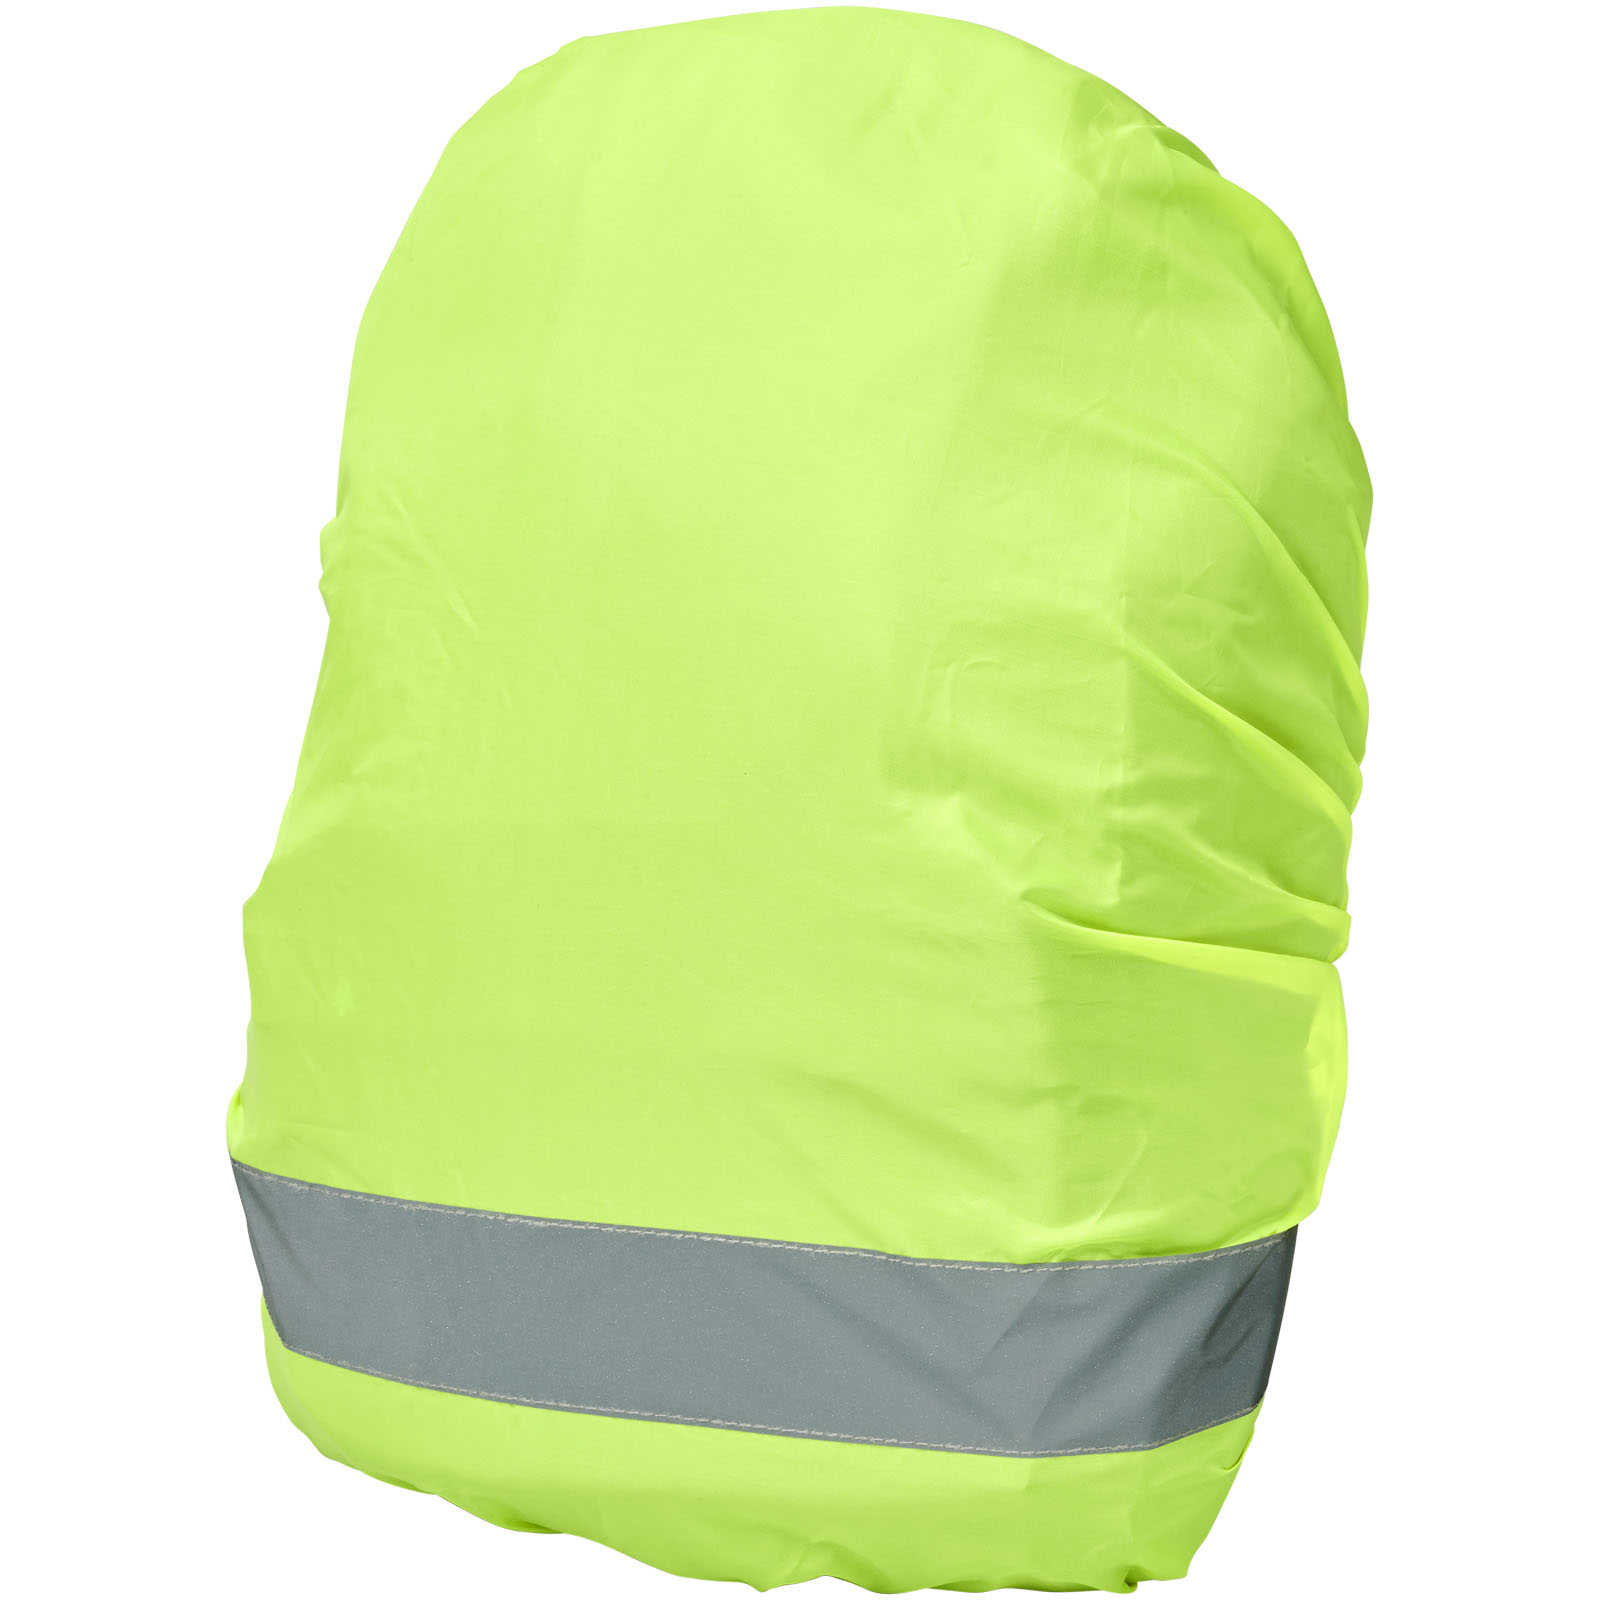 Tools & Car Accessories - RFX™ William reflective and waterproof bag cover